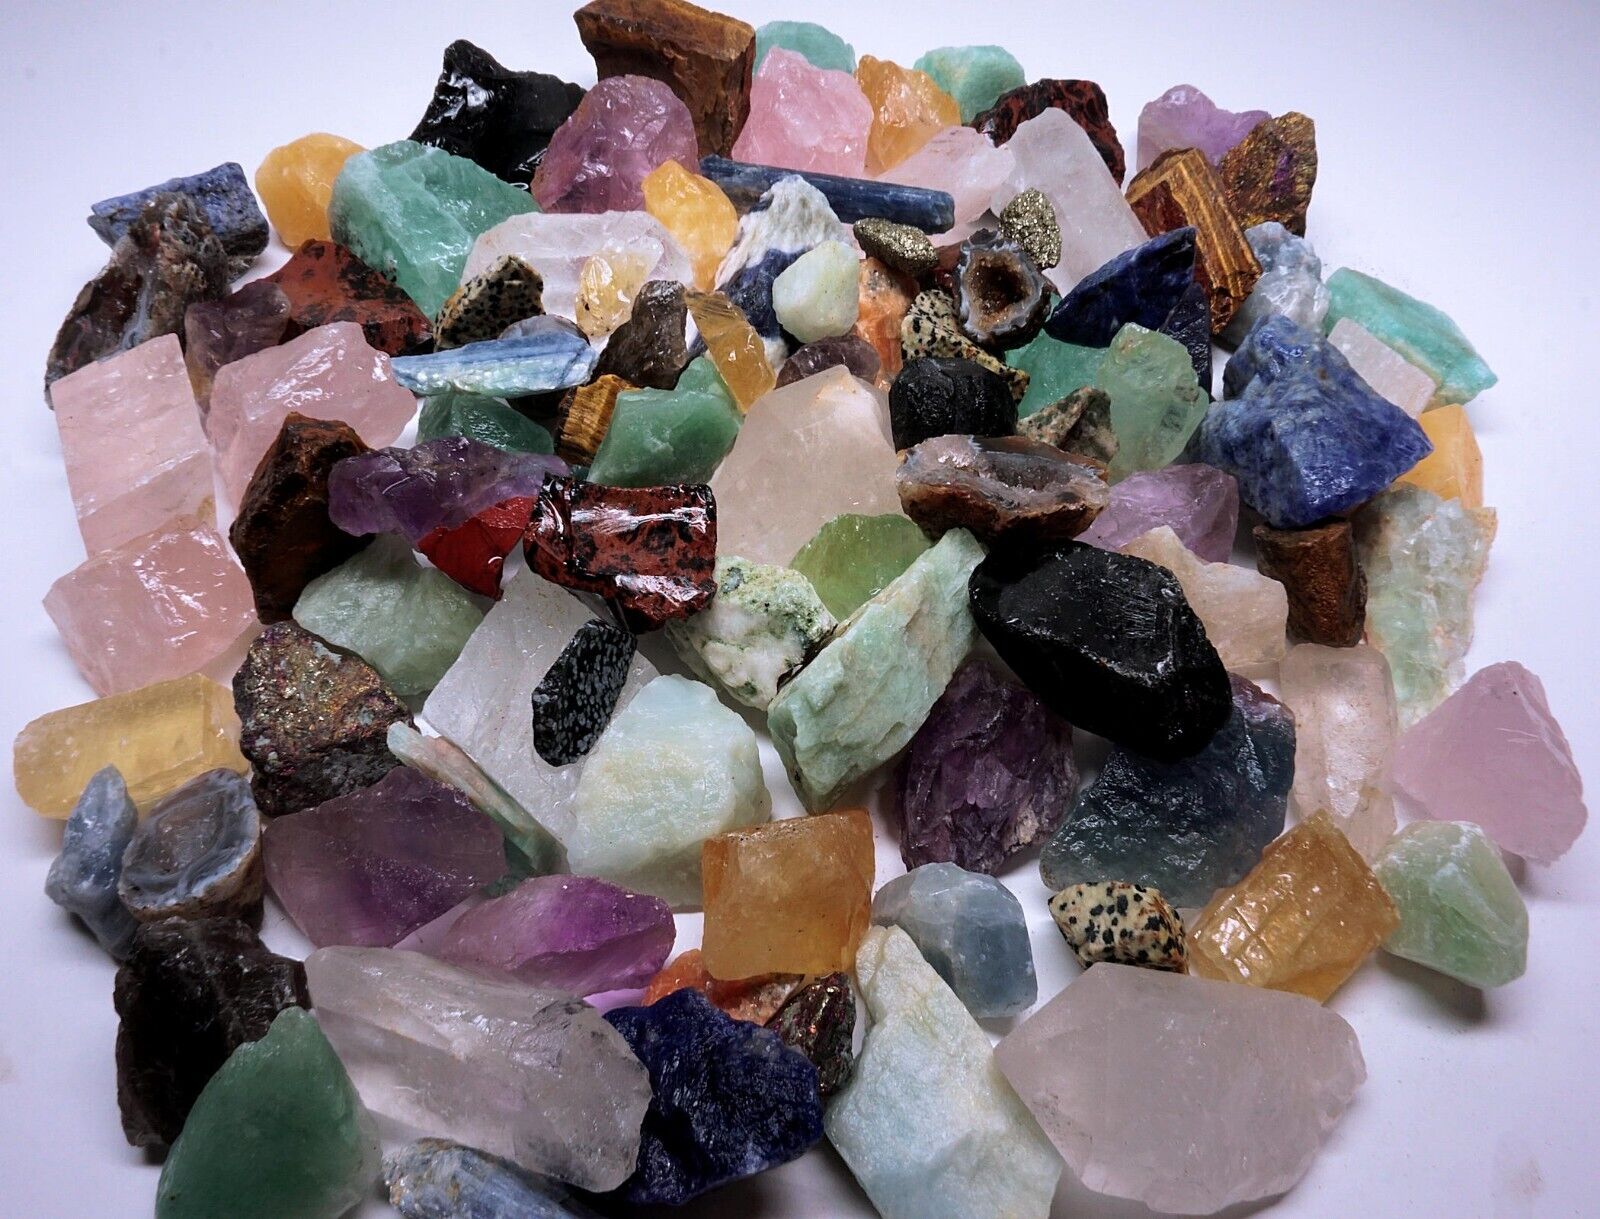 Crafters Collection 2 Pounds Natural Gems Crystals Minerals Stones